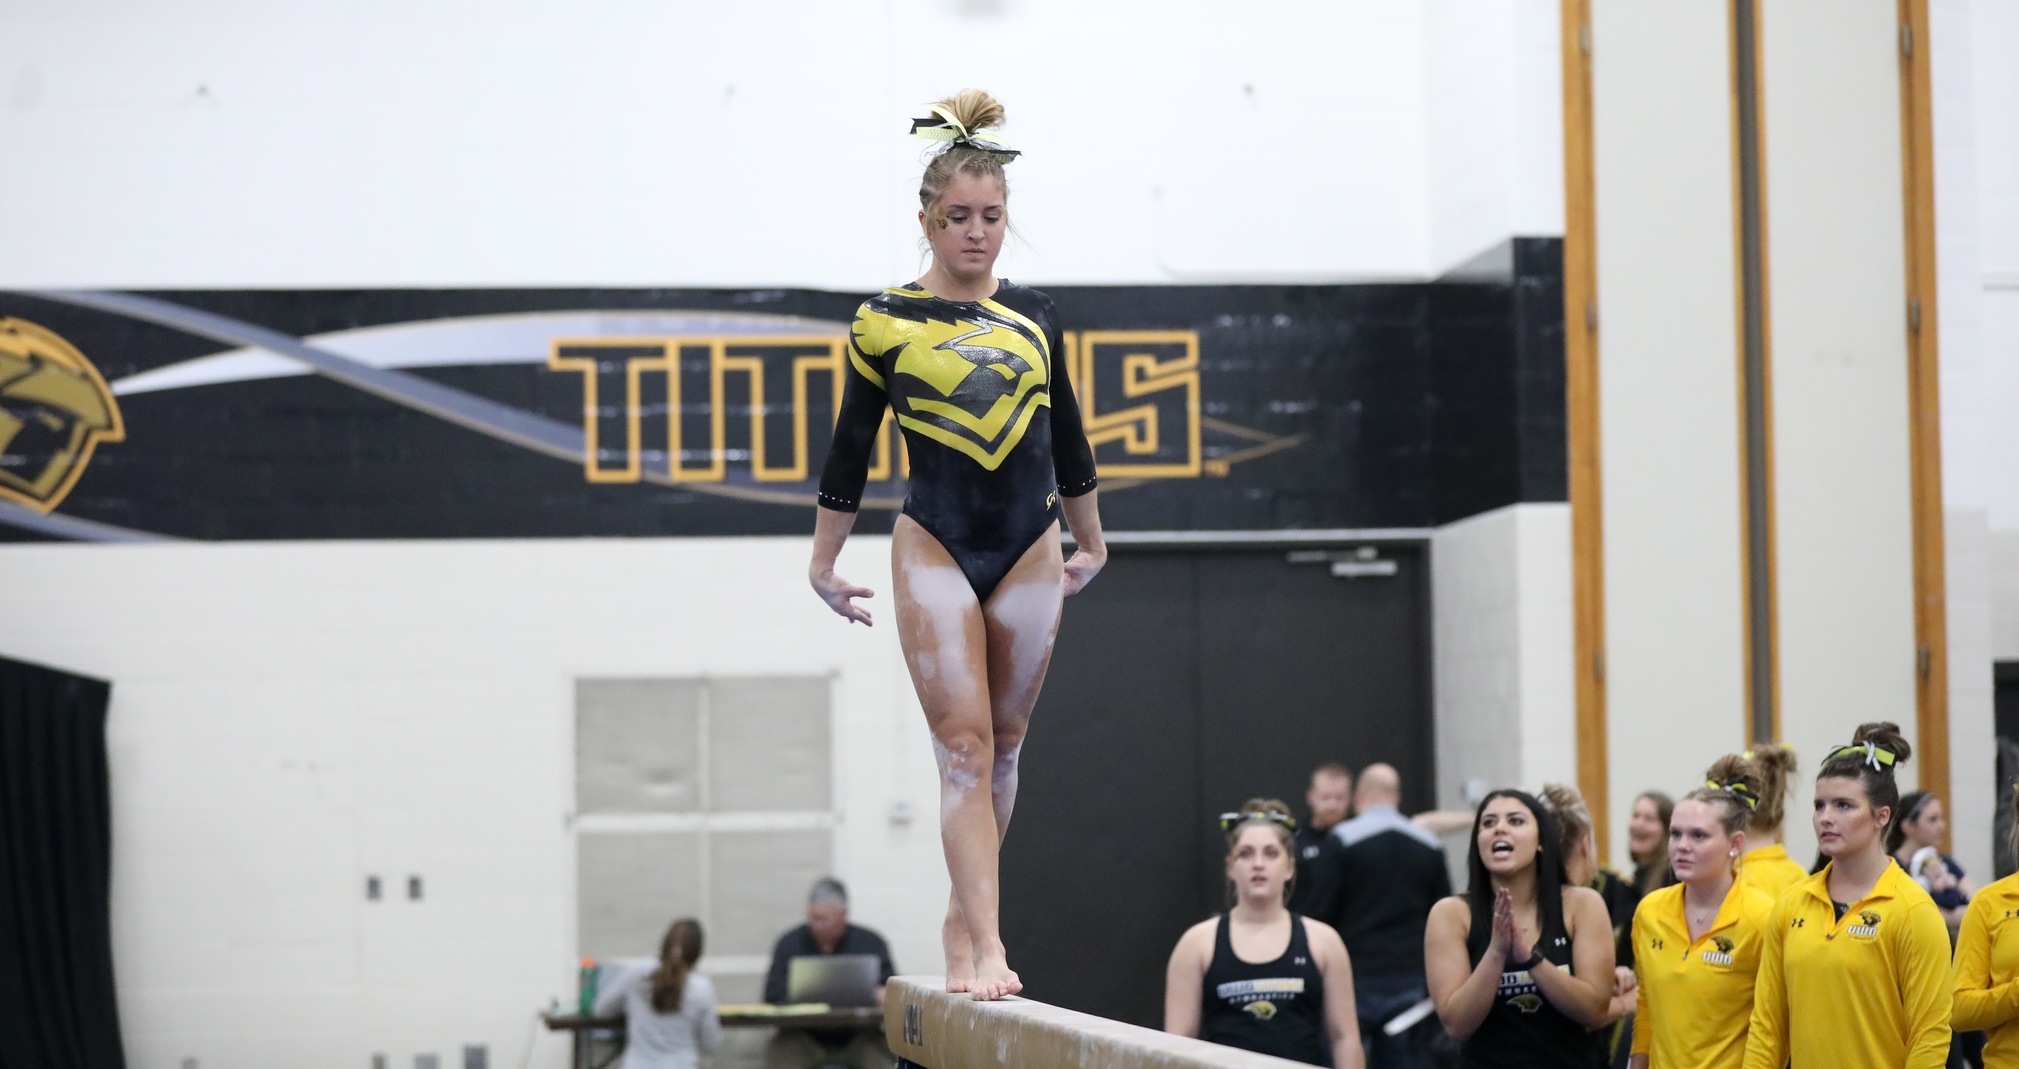 Emily Gilot won the all-around competition, placed first on the vault and fifth on the balance beam in her collegiate debut.